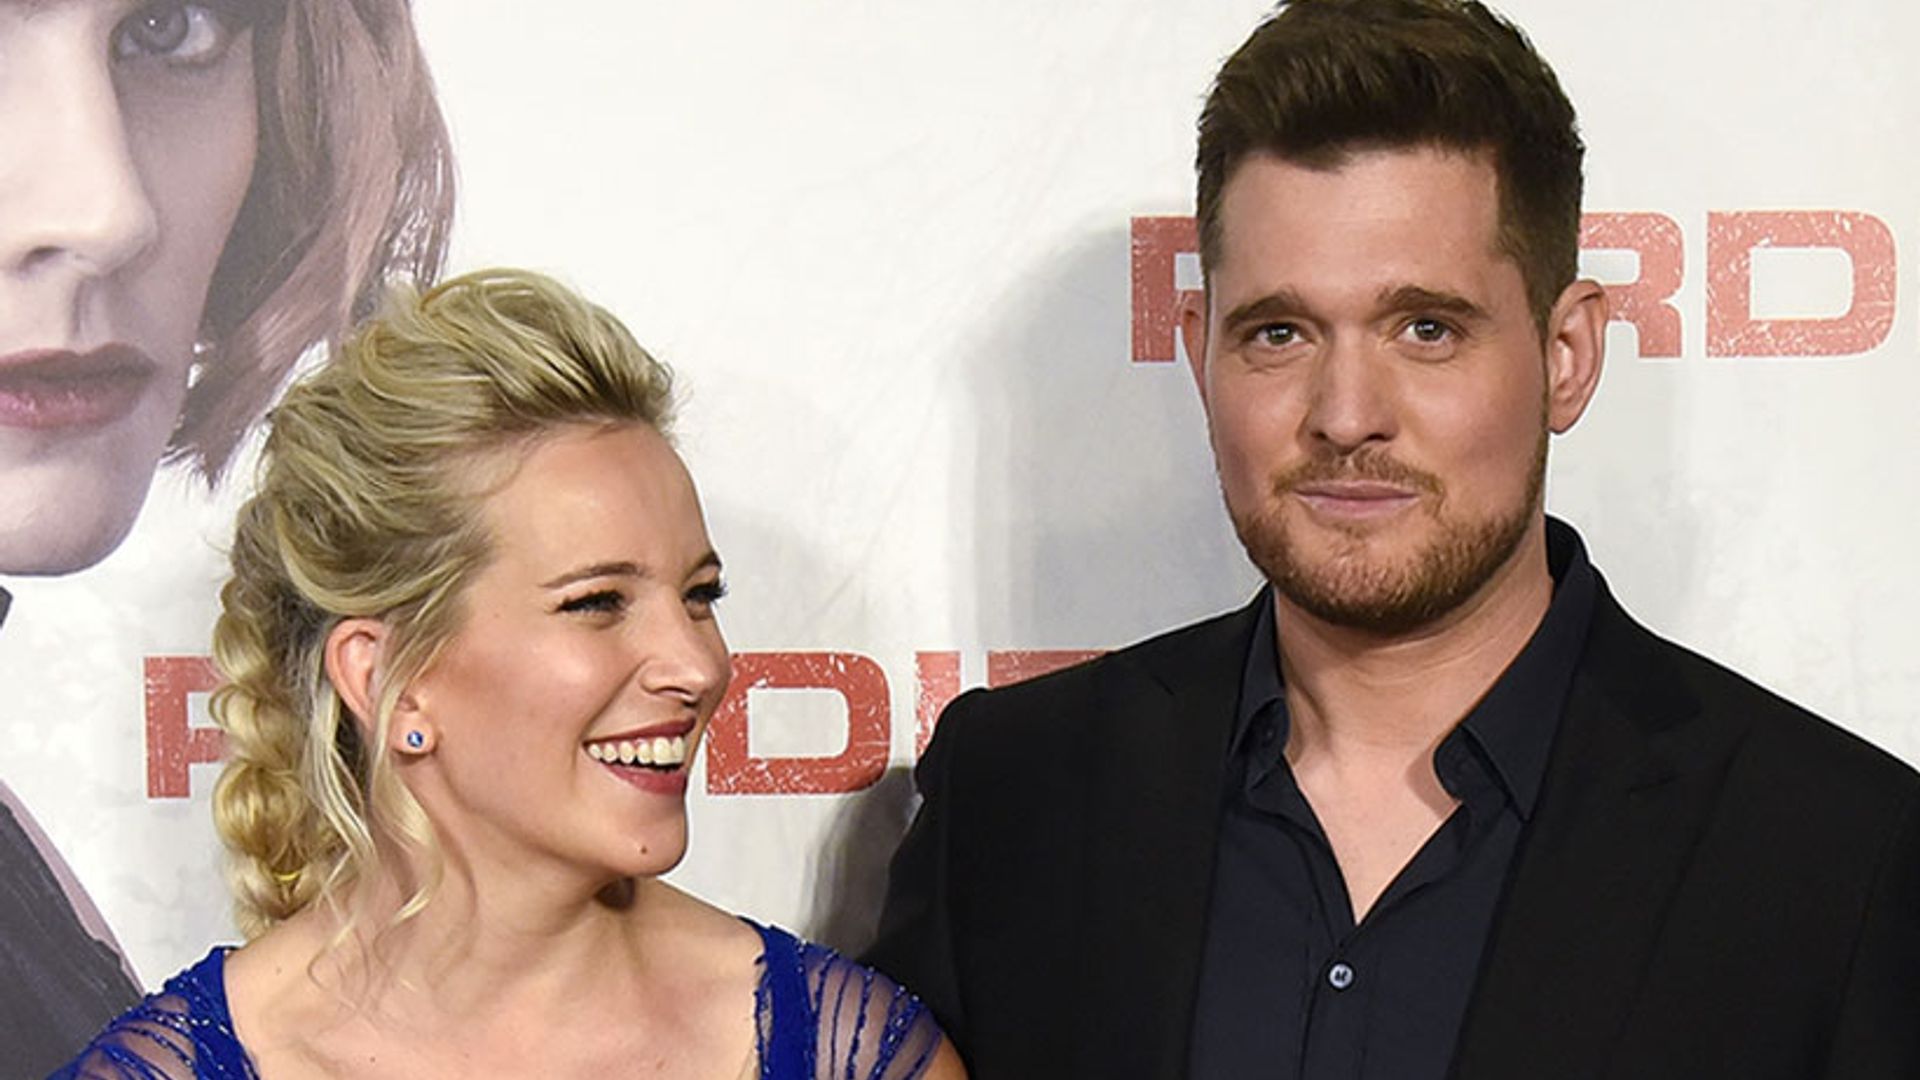 Michael Bublé's wife Luisana Lopilato shares sweet message as she enjoys the last days of her pregnancy